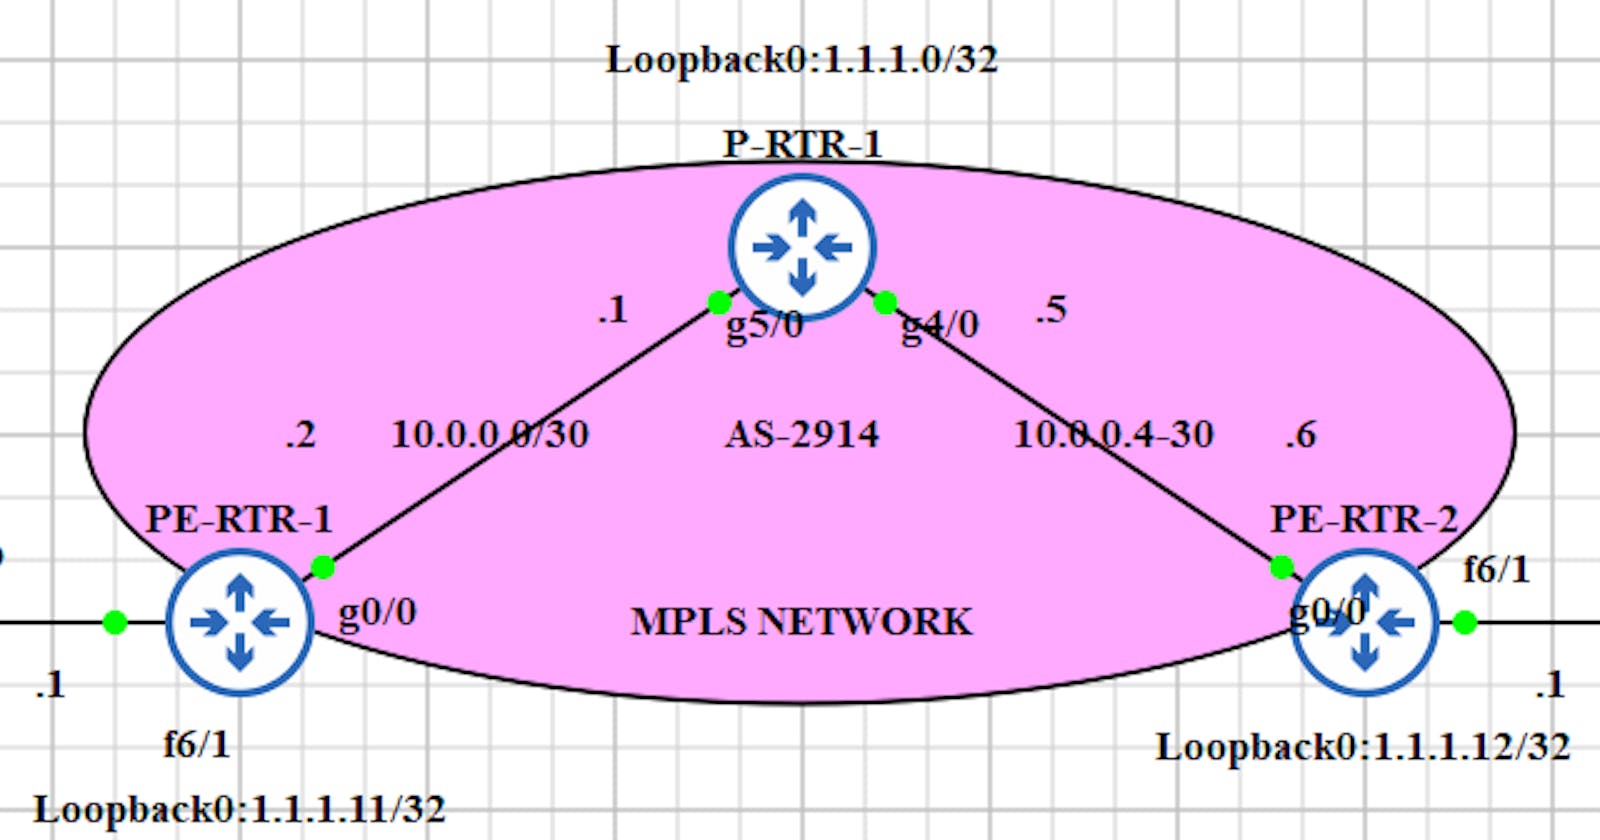 Configuring MPLS L3 VPN on Cisco IOS using GNS3 (cont.)